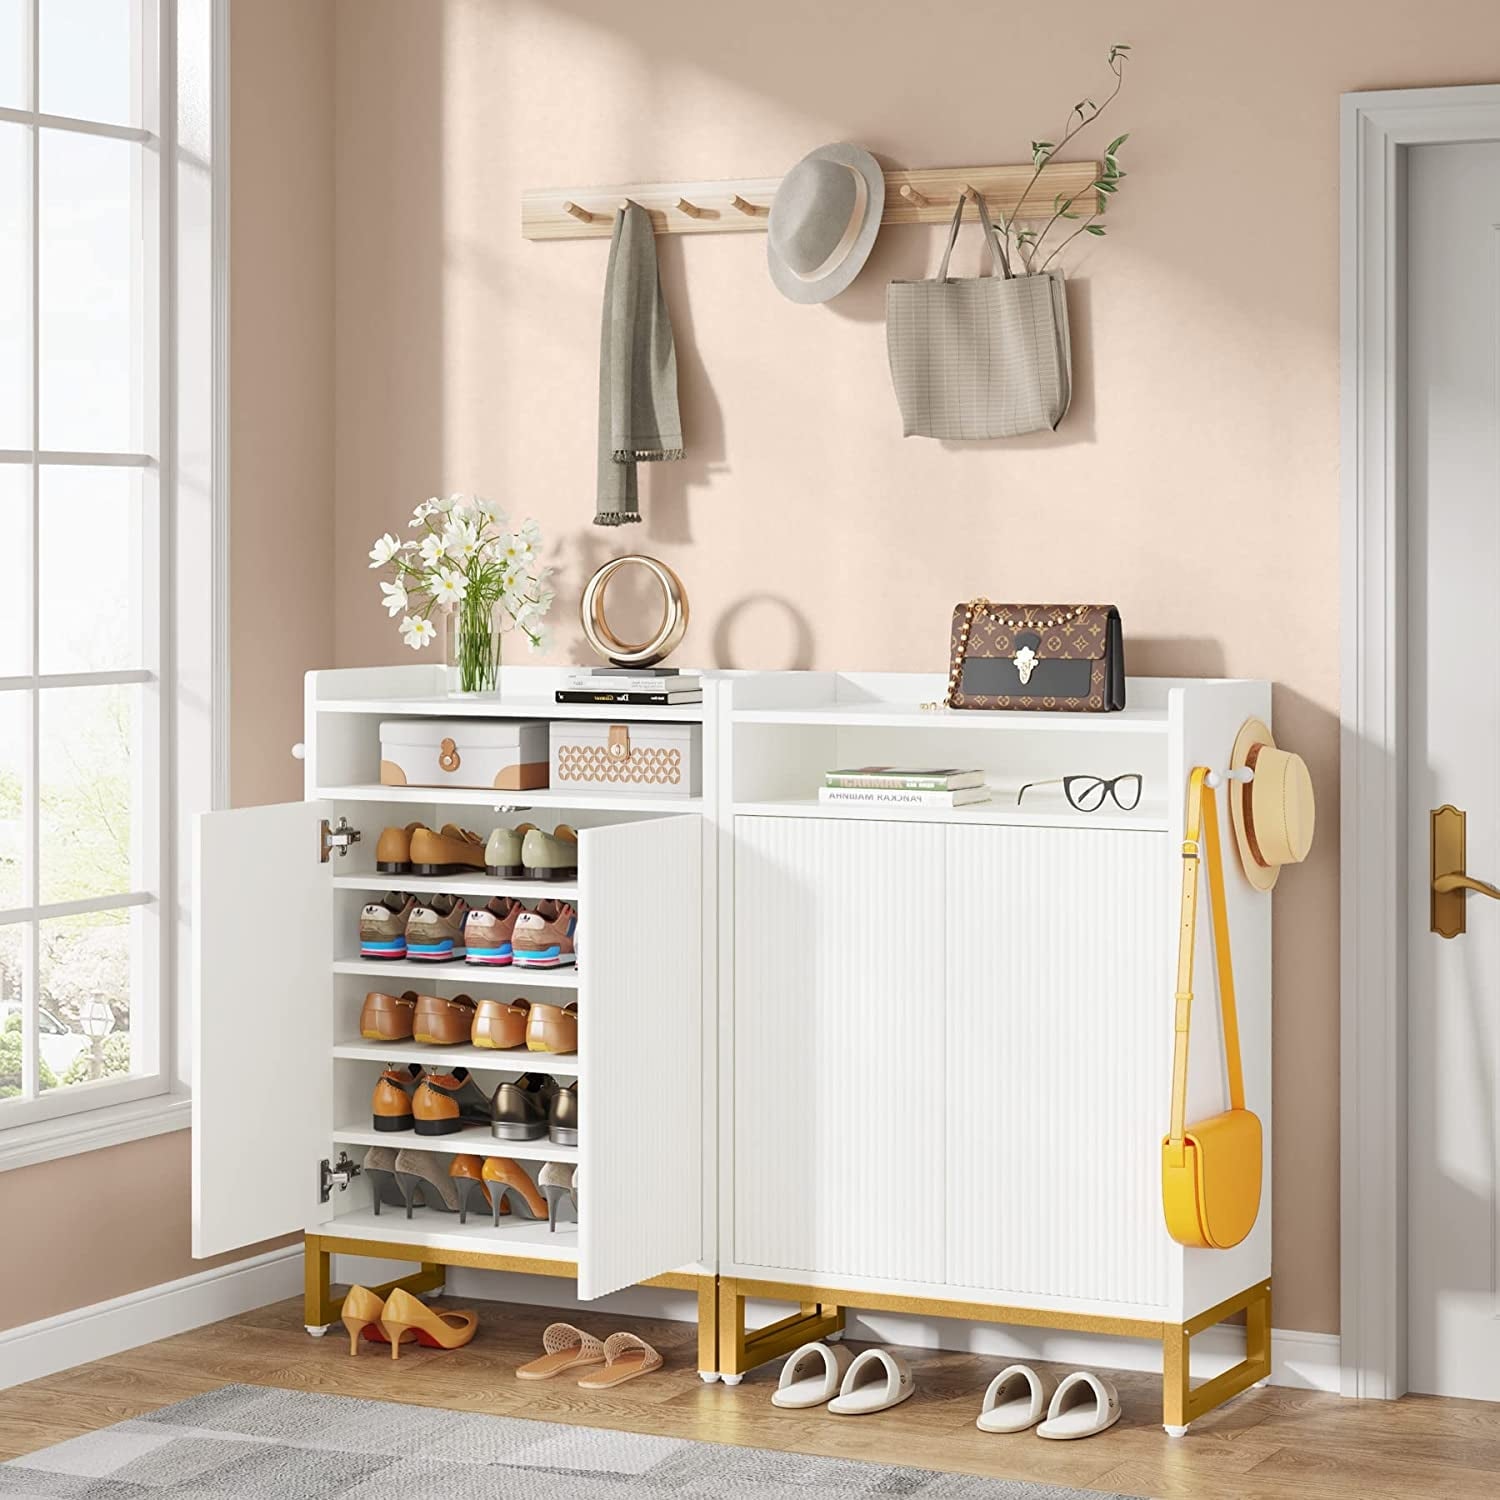 https://ak1.ostkcdn.com/images/products/is/images/direct/99efede51b7e14d54dadf22ec3177c45e17ba37a/Shoe-Cabinet-5-Tier-Shoe-Storage-Cabinet-with-Open-Shelves-%26-Hooks%2C-Modern-Shoe-Organizer-for-Entryway%2C-Hallway%2C-Bedroom.jpg